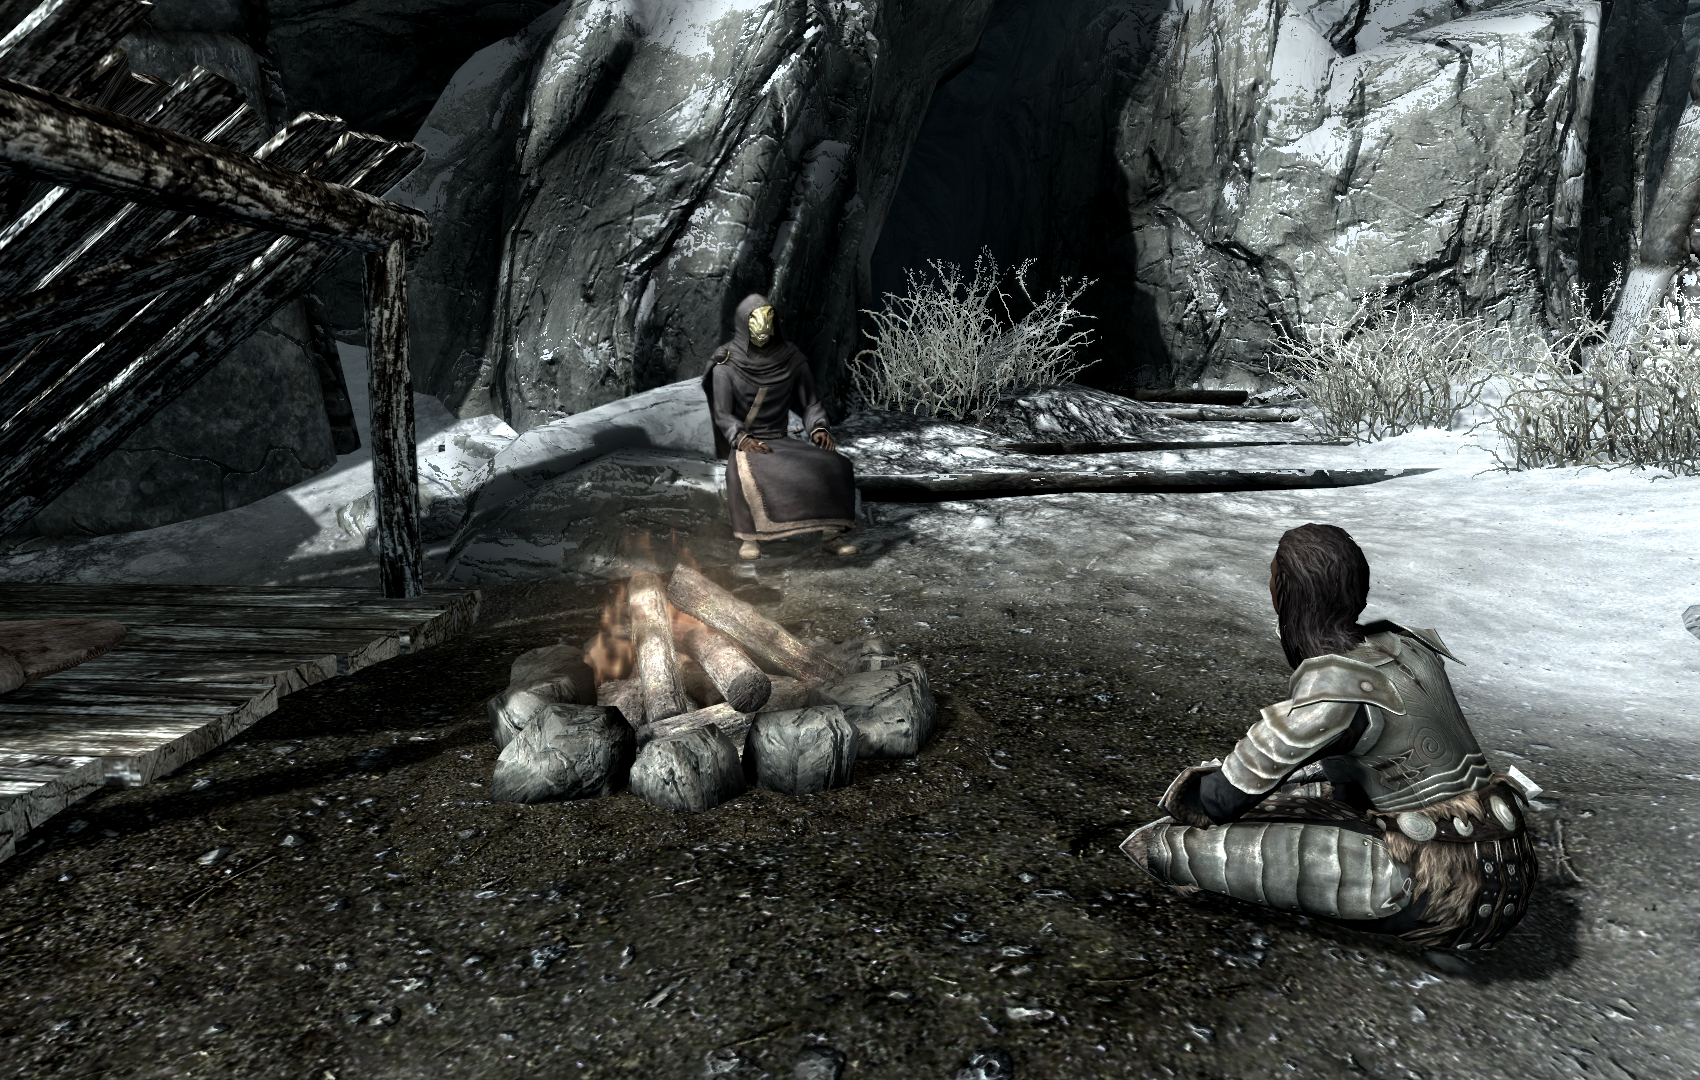 Skyrim Coming of Age quest